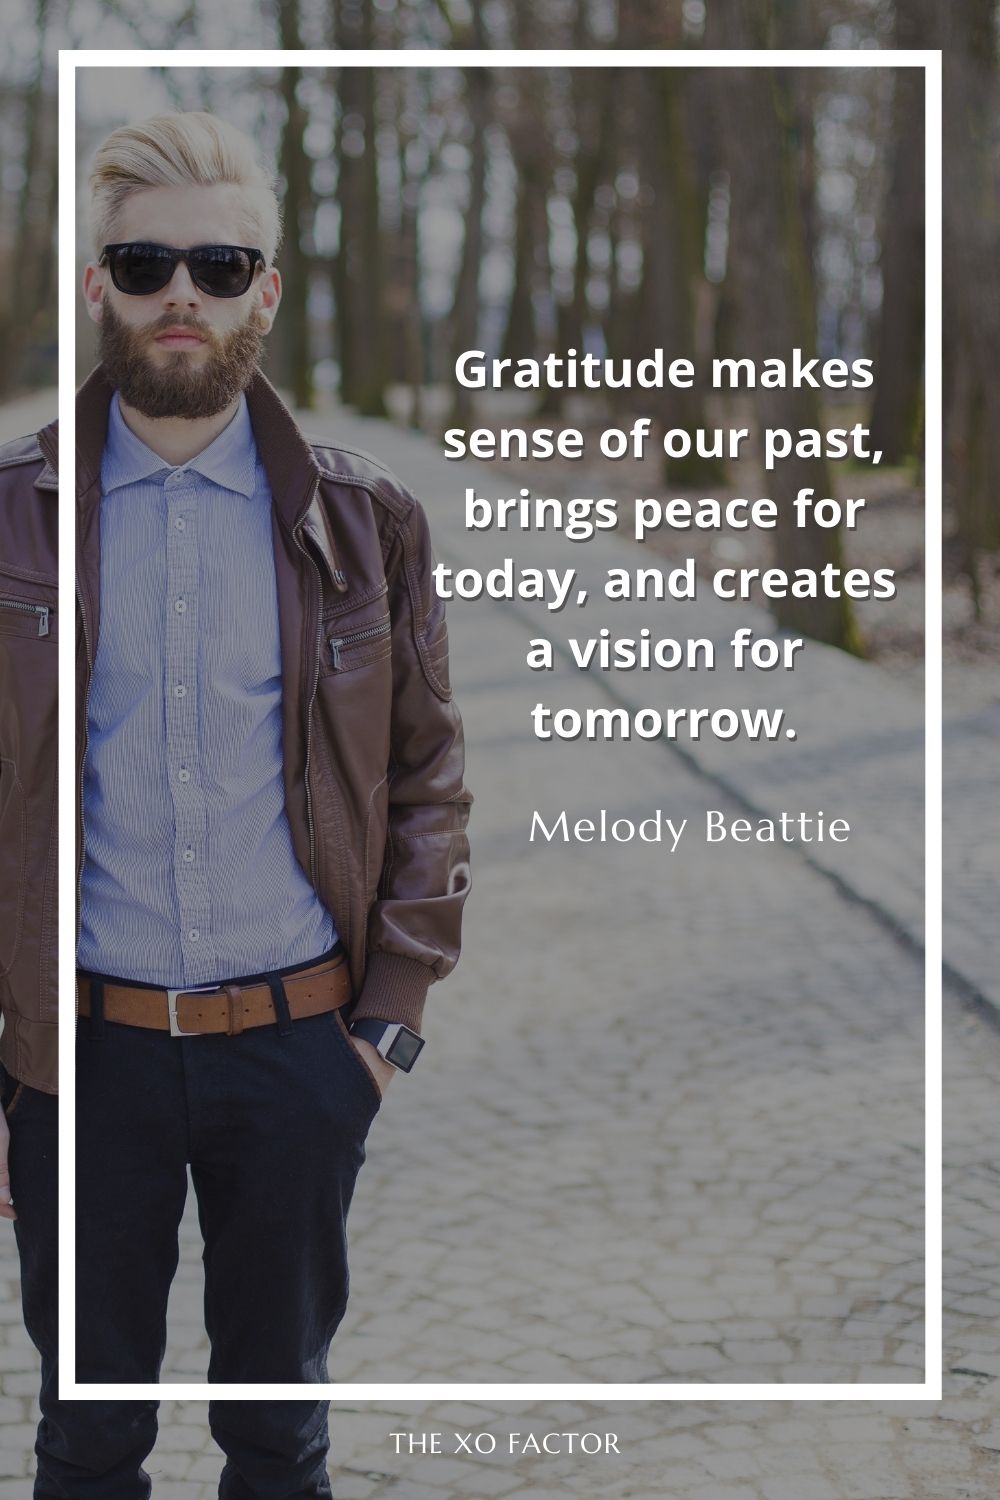 Gratitude makes sense of our past, brings peace for today, and creates a vision for tomorrow.